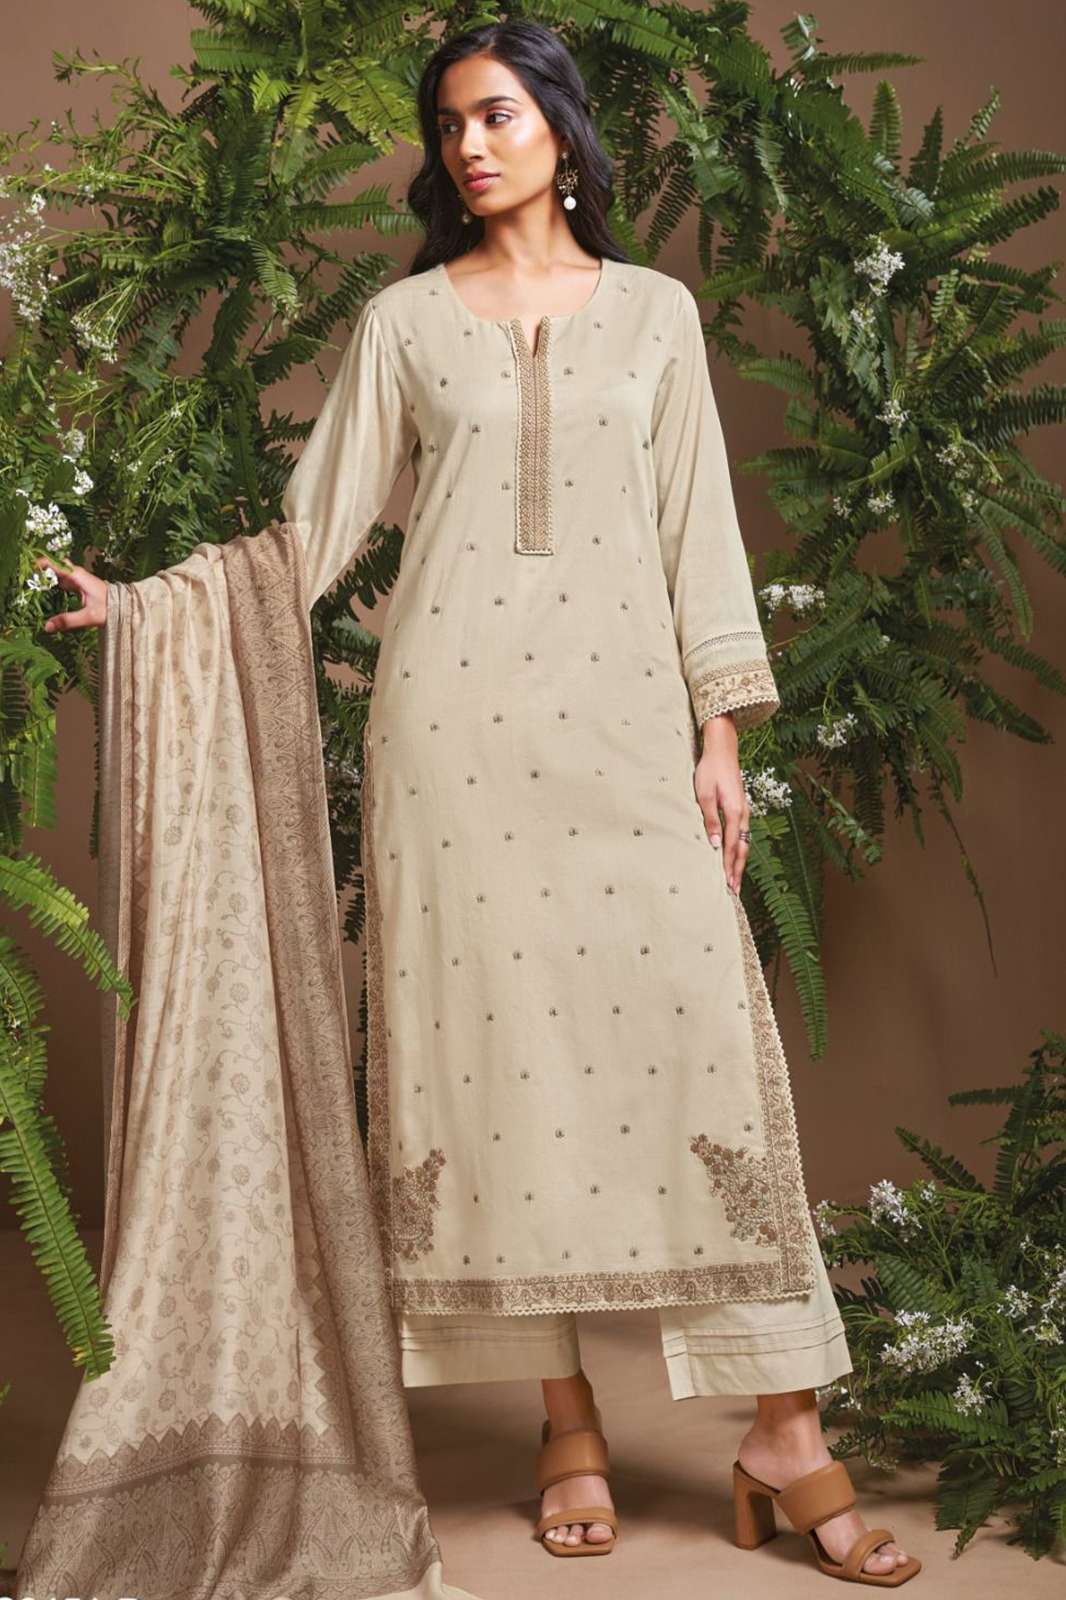 Ganga Eloraina 2451COTTON PATTERN SOLID WITH NECK & DAMAN EMBROIDERY WITH LACE SUIT